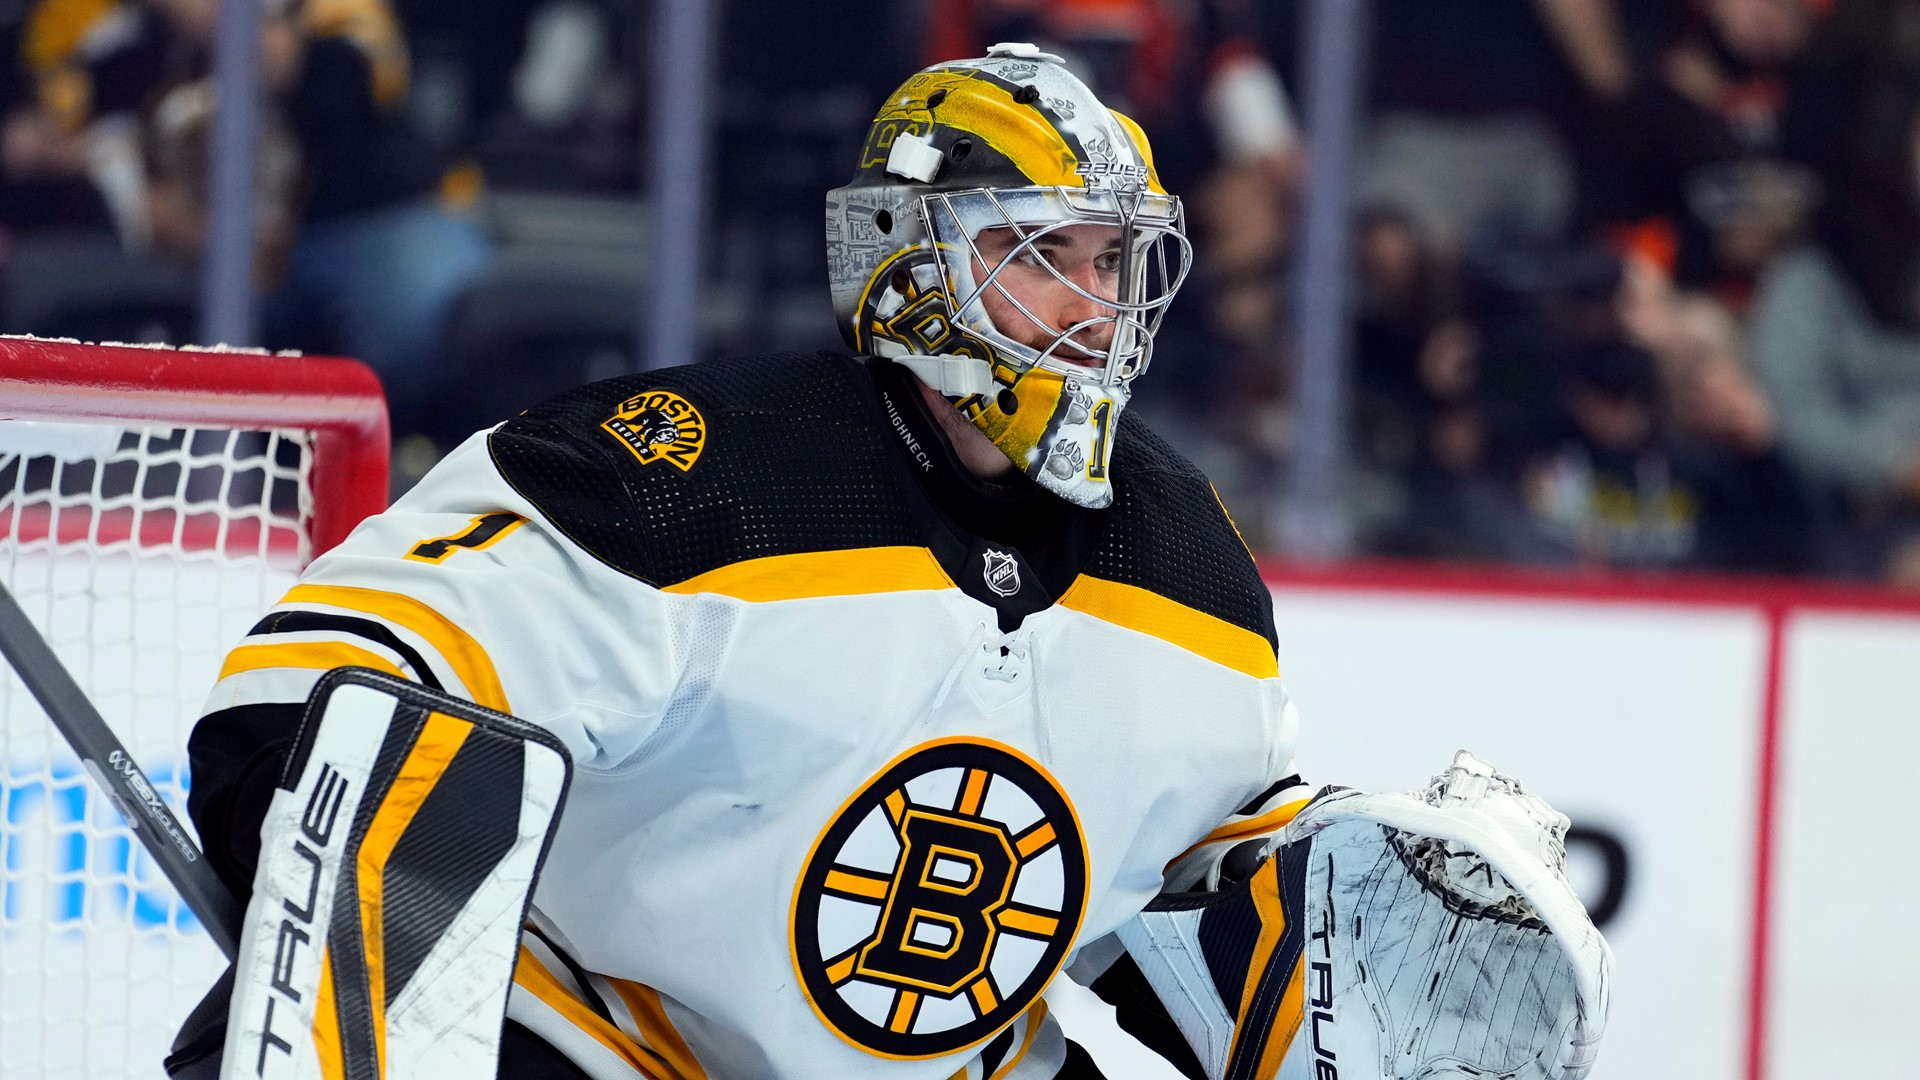 Bruins goalie Jeremy Swayman shows solidarity with Maine amid tragedy |  newscentermaine.com